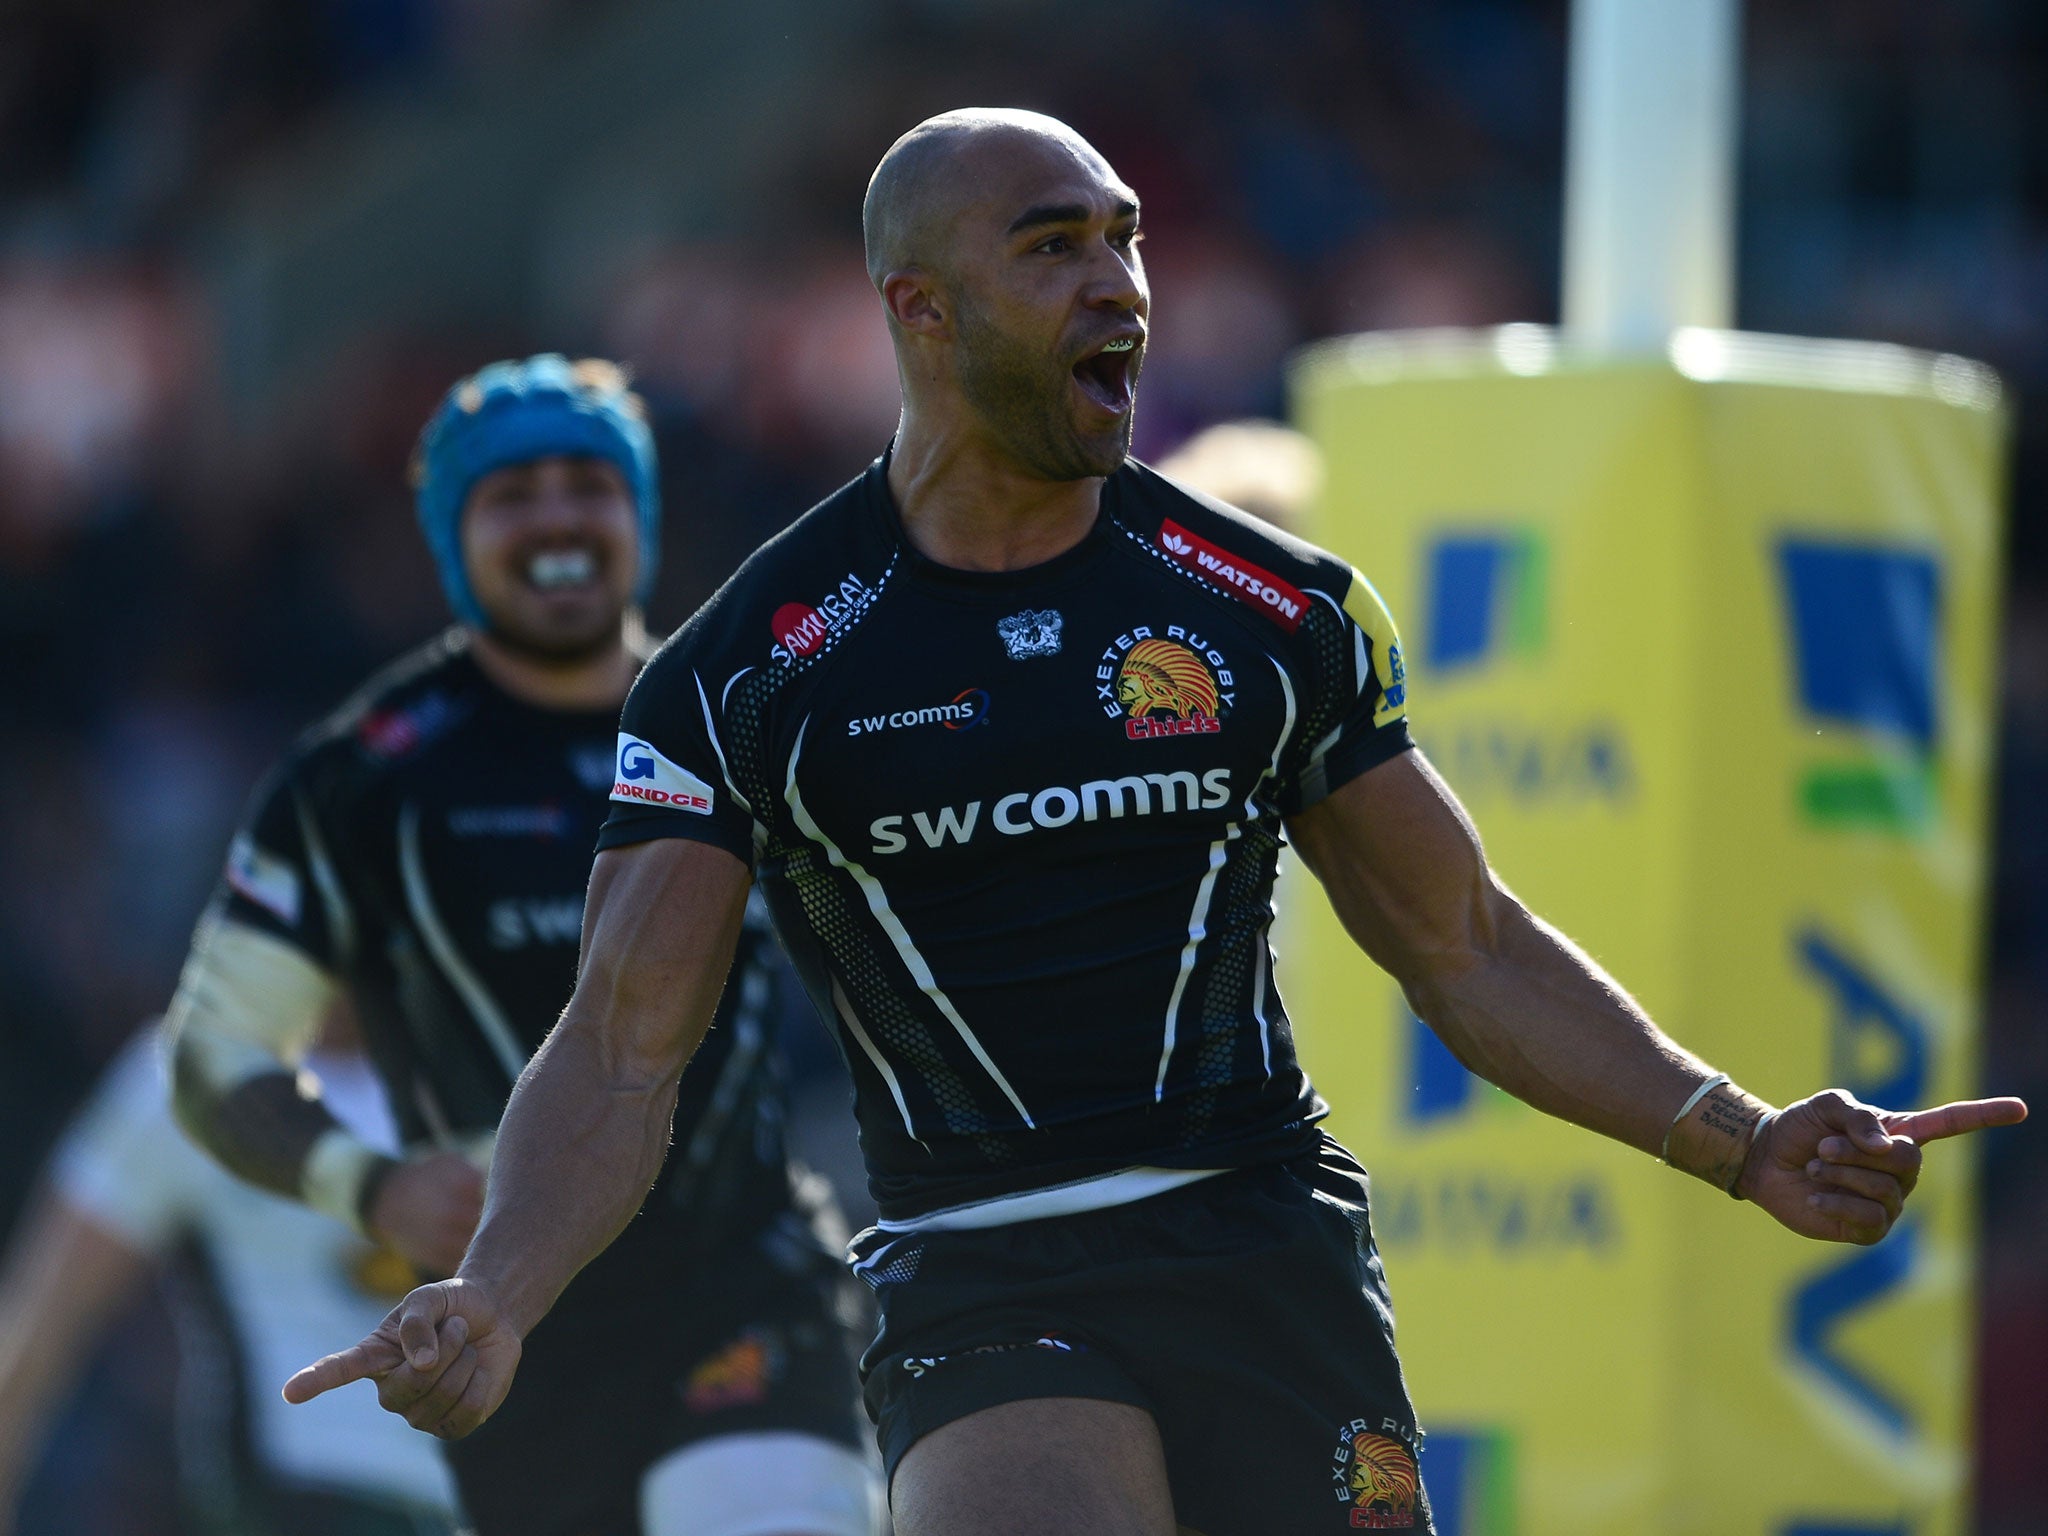 Olly Woodburn celebrates after scoring a try for Exeter against Northampton Saints